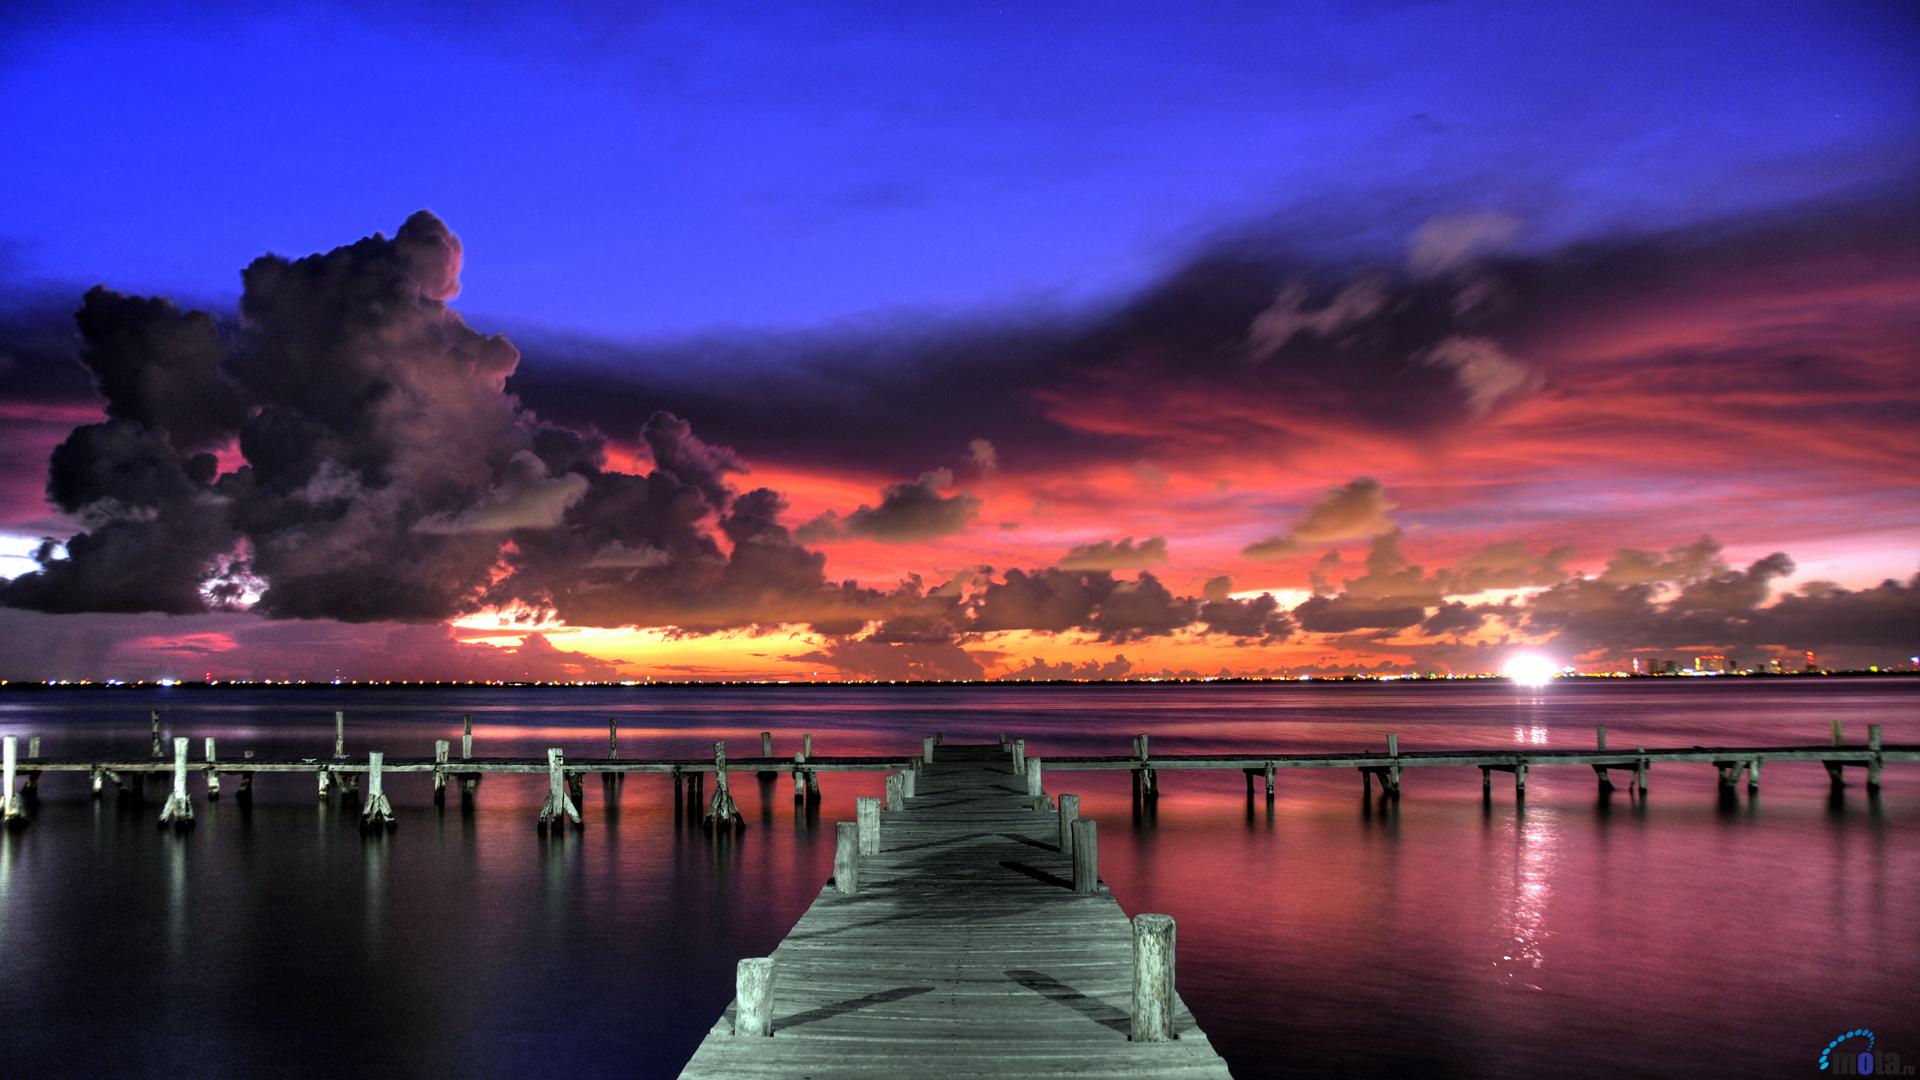 Download Wallpaper Bright tropical sunset 1920 x 1080 HDTV 1080p